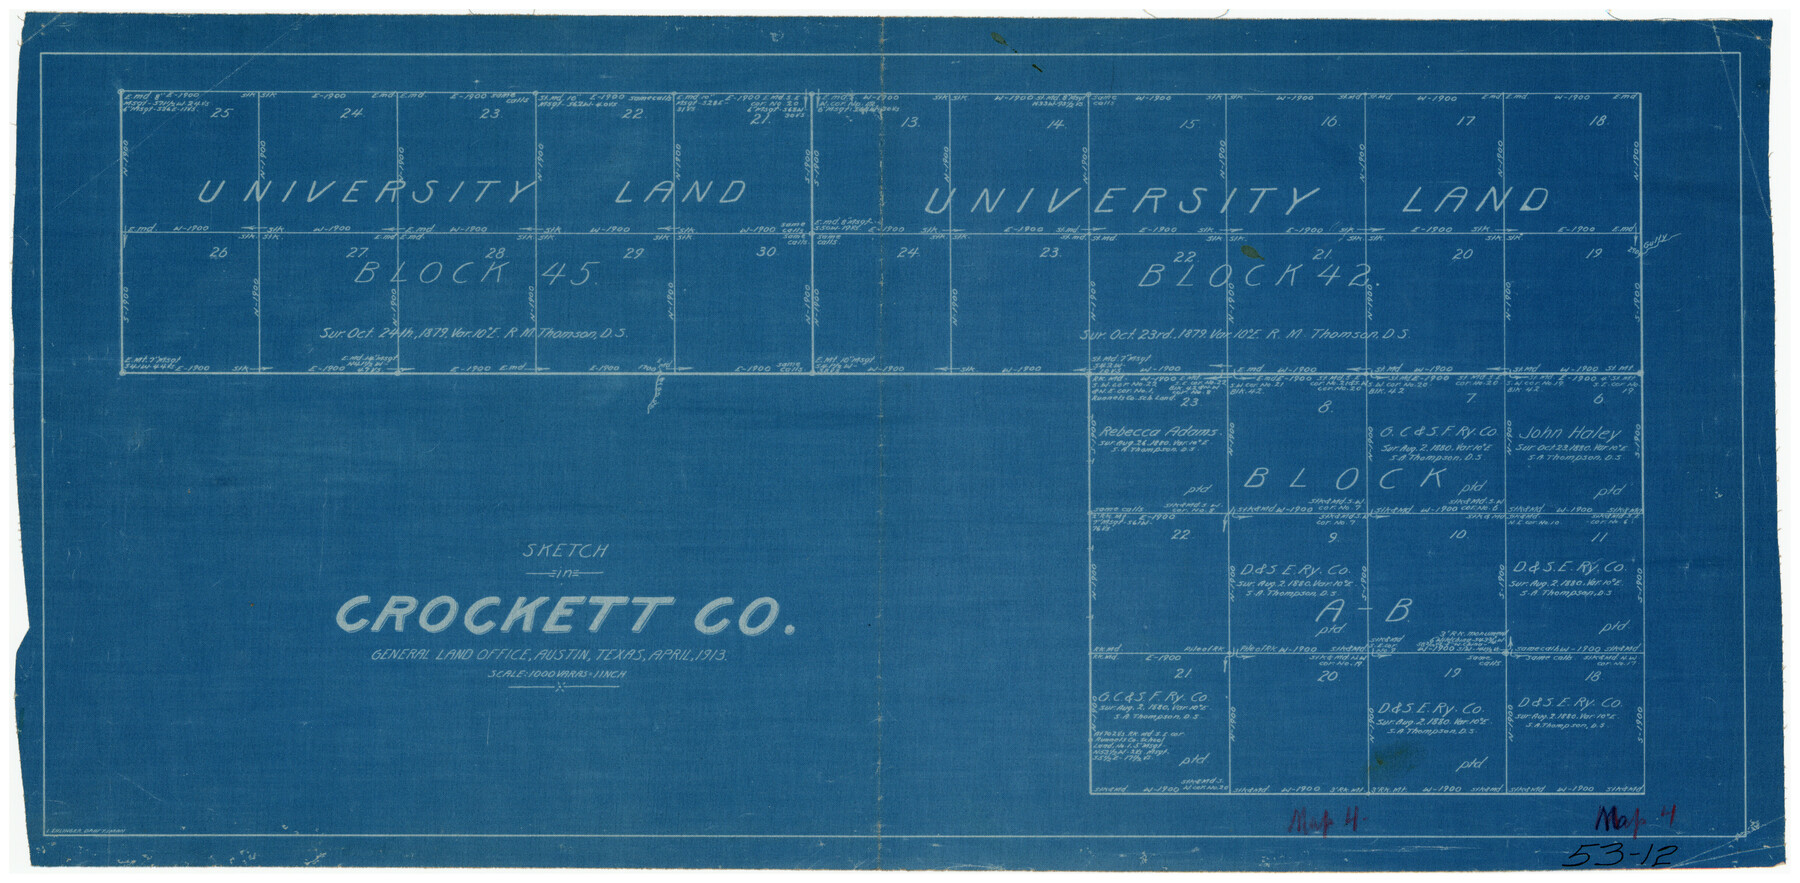 90313, Sketch in Crockett County [showing University Land Blocks 42 and 45 and Block A-B], Twichell Survey Records